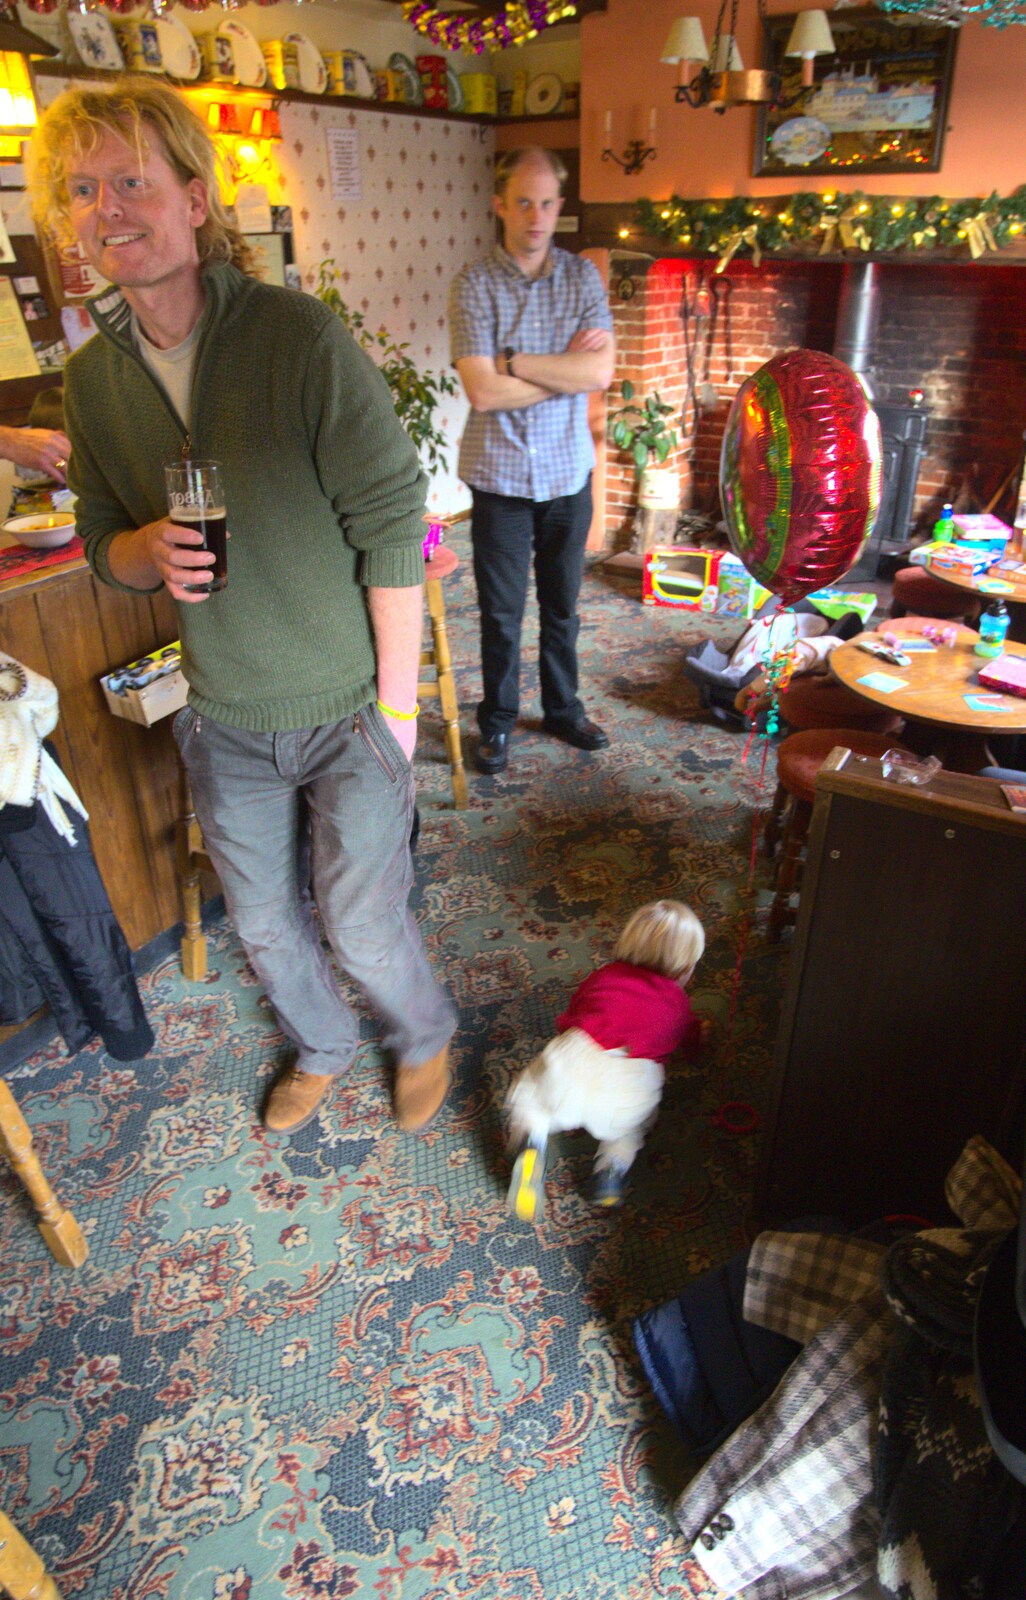 Oak scoots around on the floor of the pub from Christmas Day in the Swan Inn, Brome, Suffolk - 25th December 2011